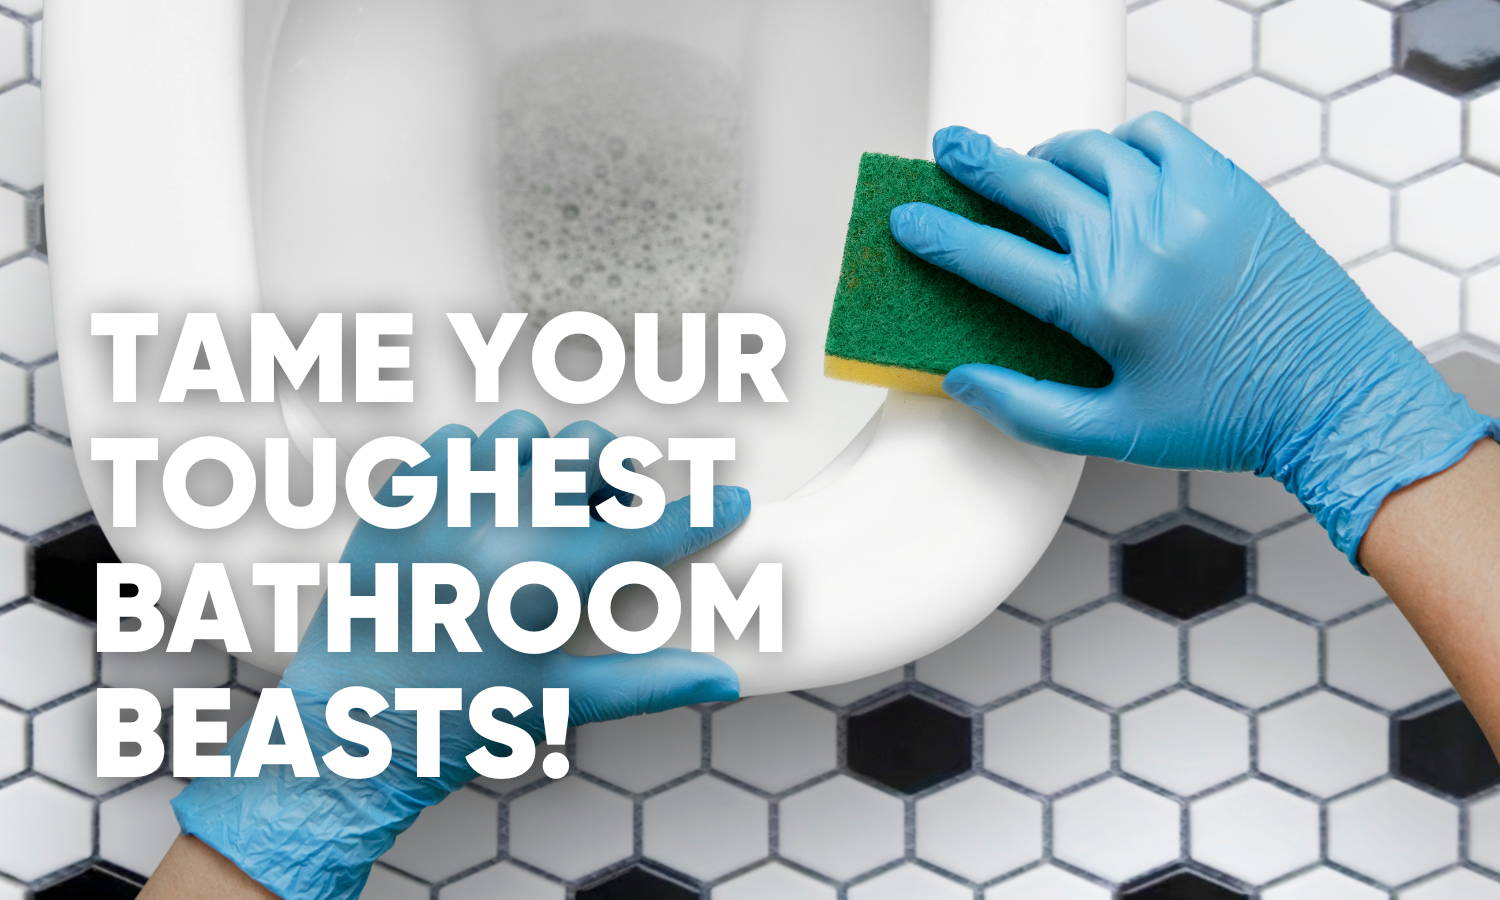 The Best Way to Clean Showers, Tubs, and Toilets